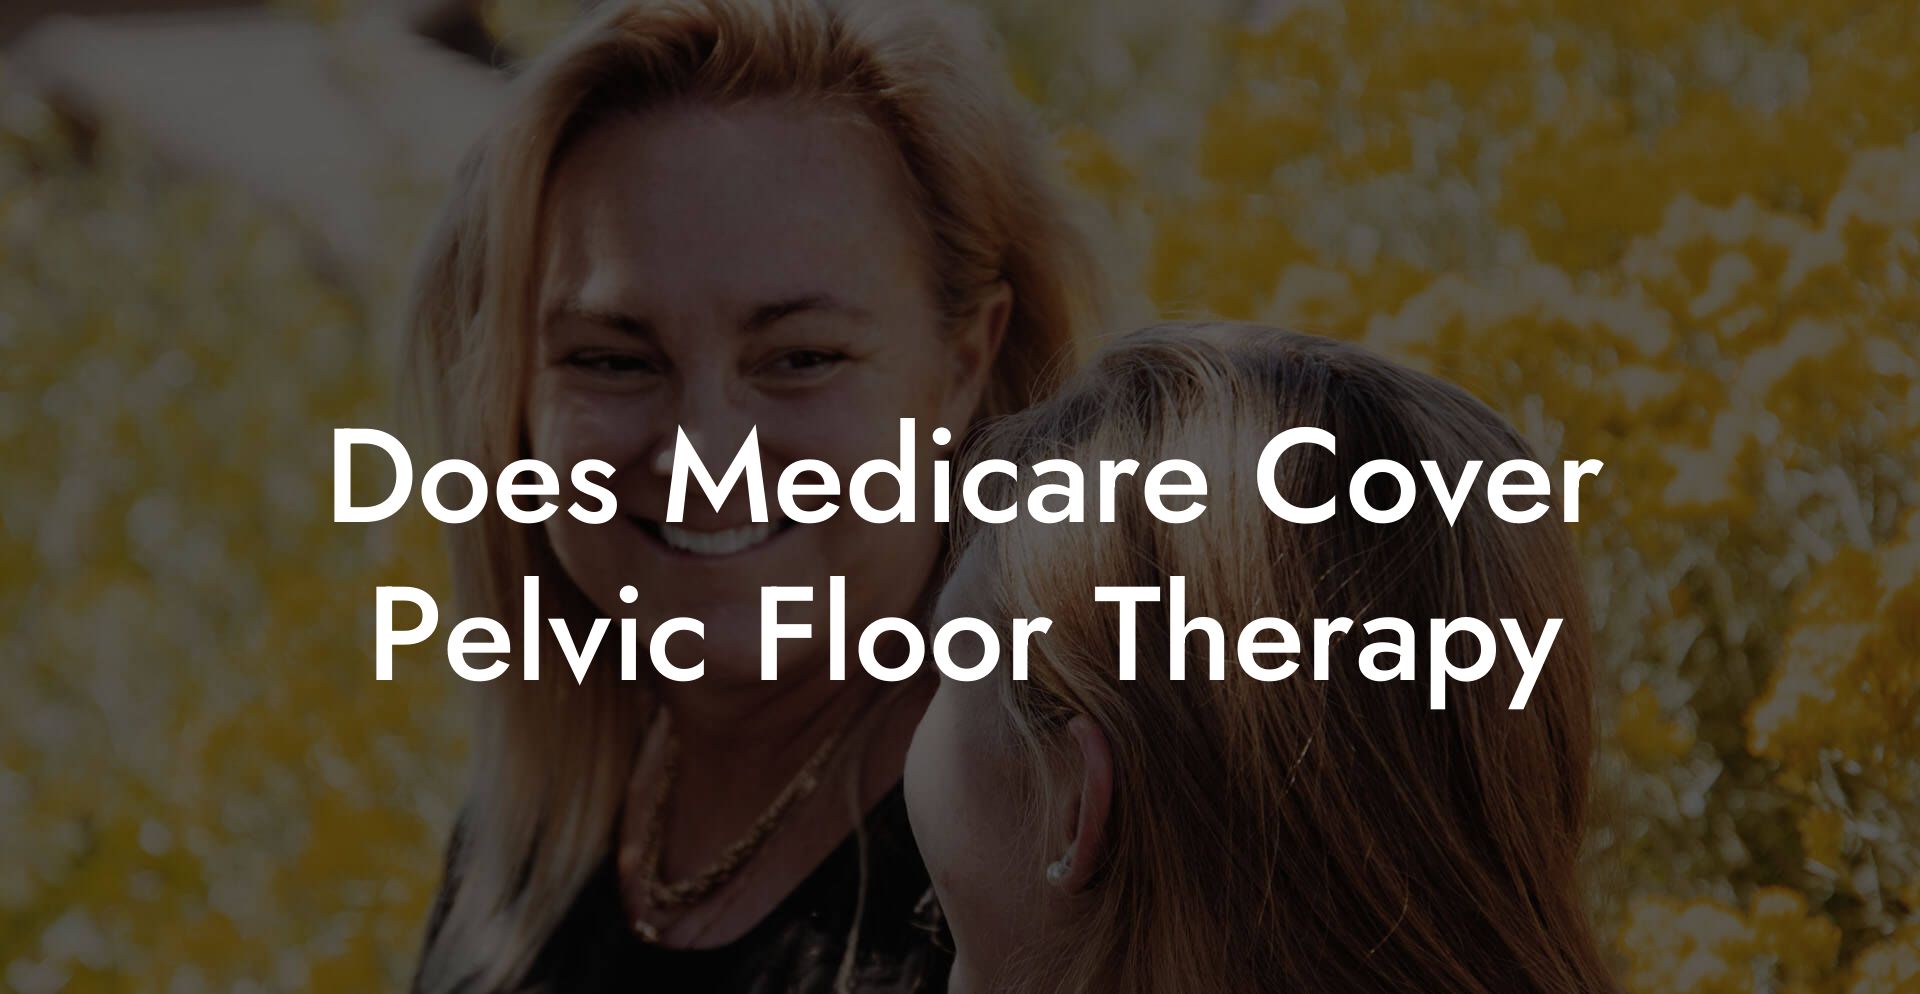 Does Medicare Cover Pelvic Floor Therapy